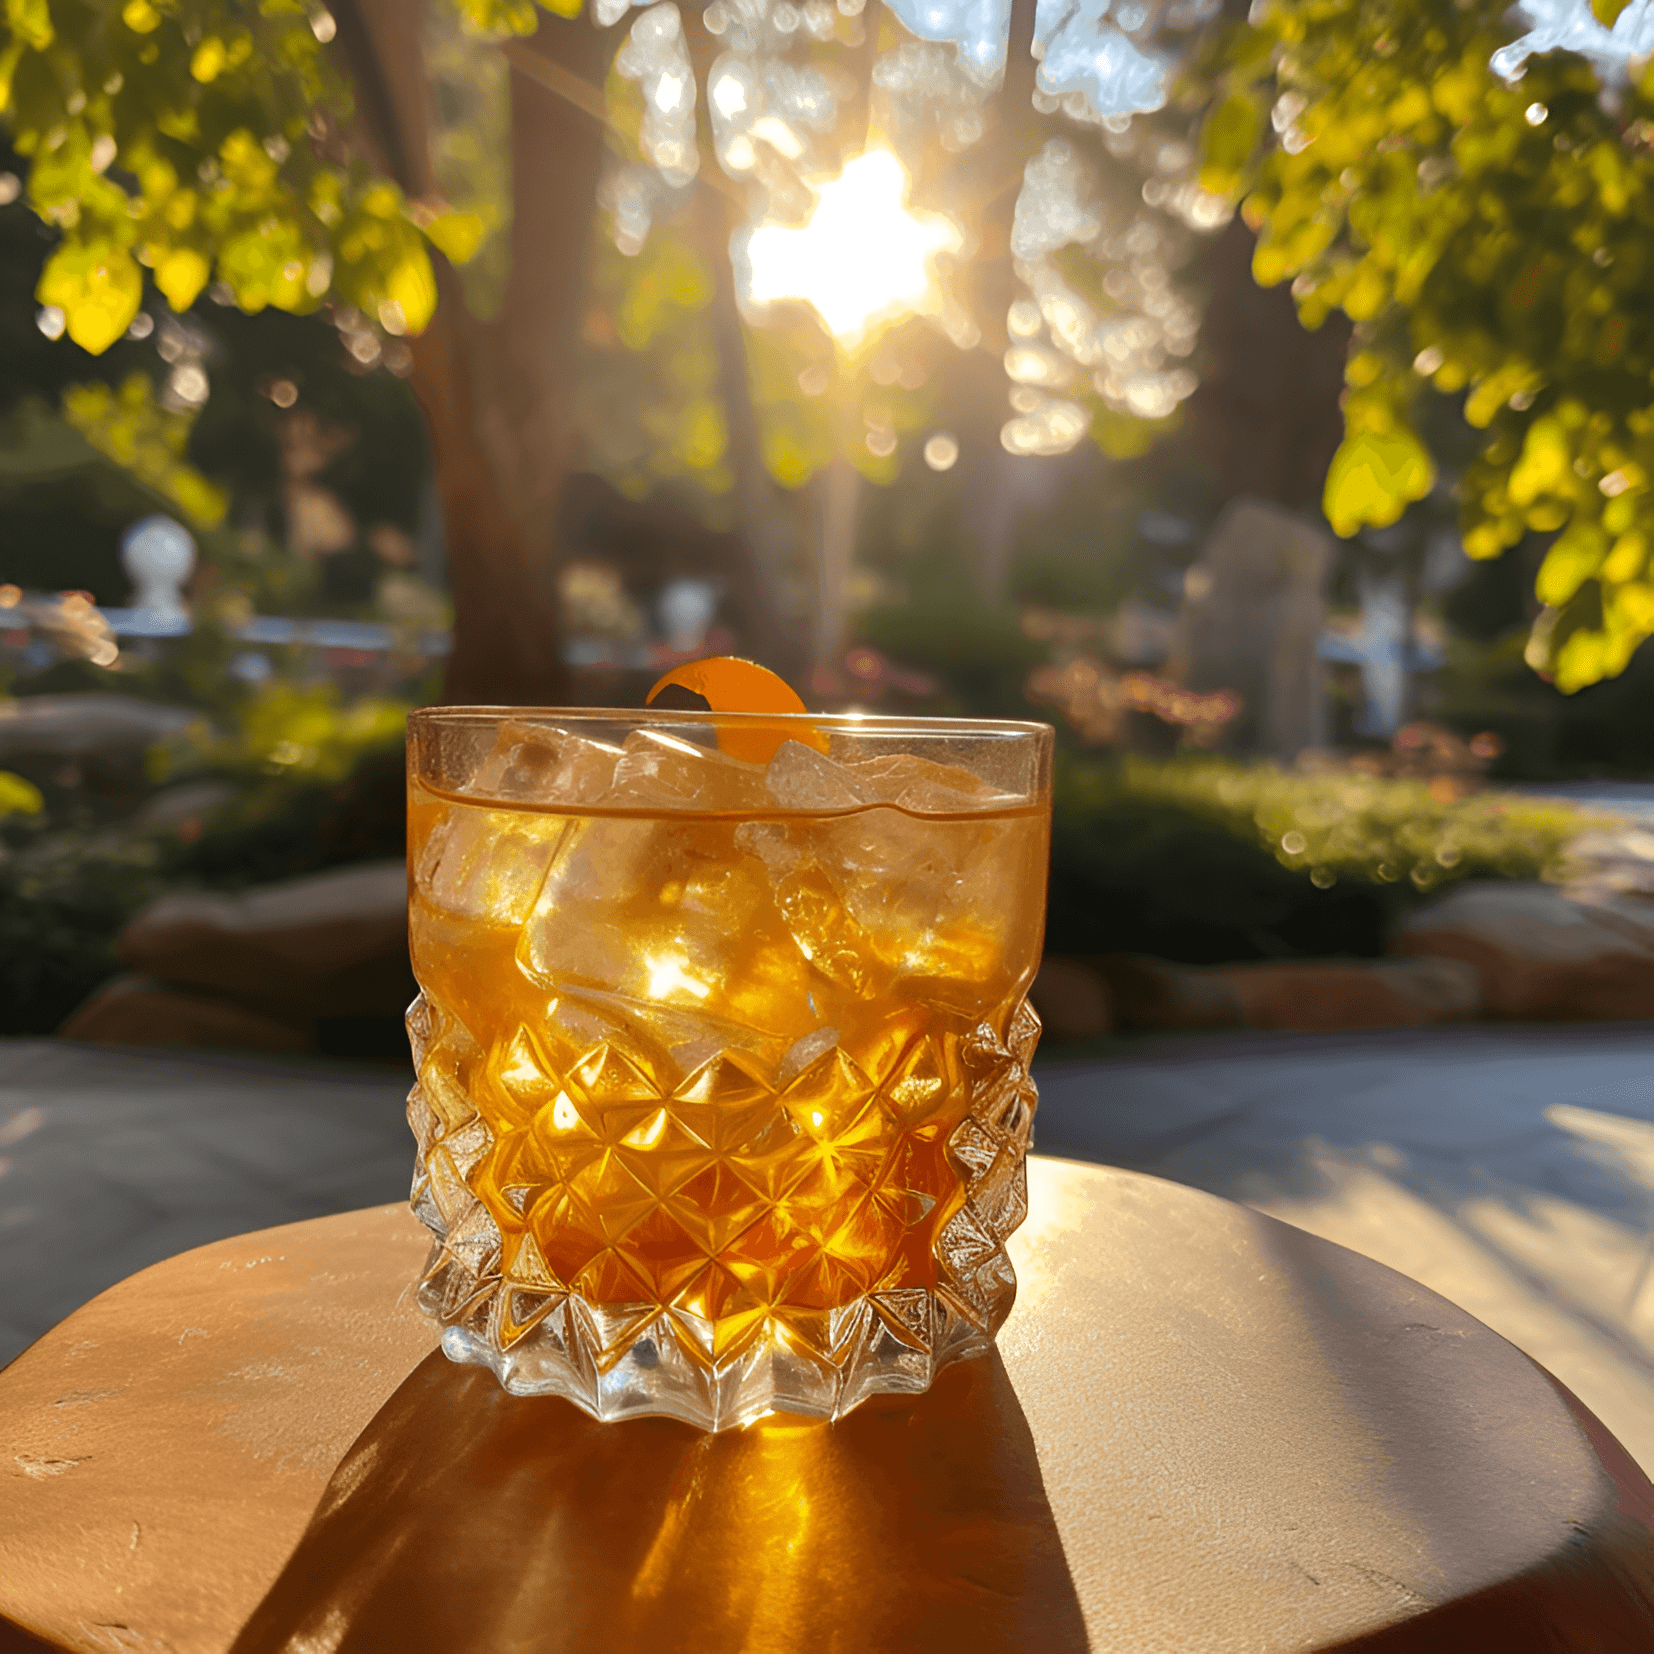 Stone Sour Cocktail Recipe - The Stone Sour cocktail is a delightful mix of sweet, sour, and fruity flavors. The whiskey provides a strong, bold base, while the lemon juice adds a tangy, zesty kick. The orange juice brings a sweet, refreshing element, and the simple syrup helps to balance out the sourness.